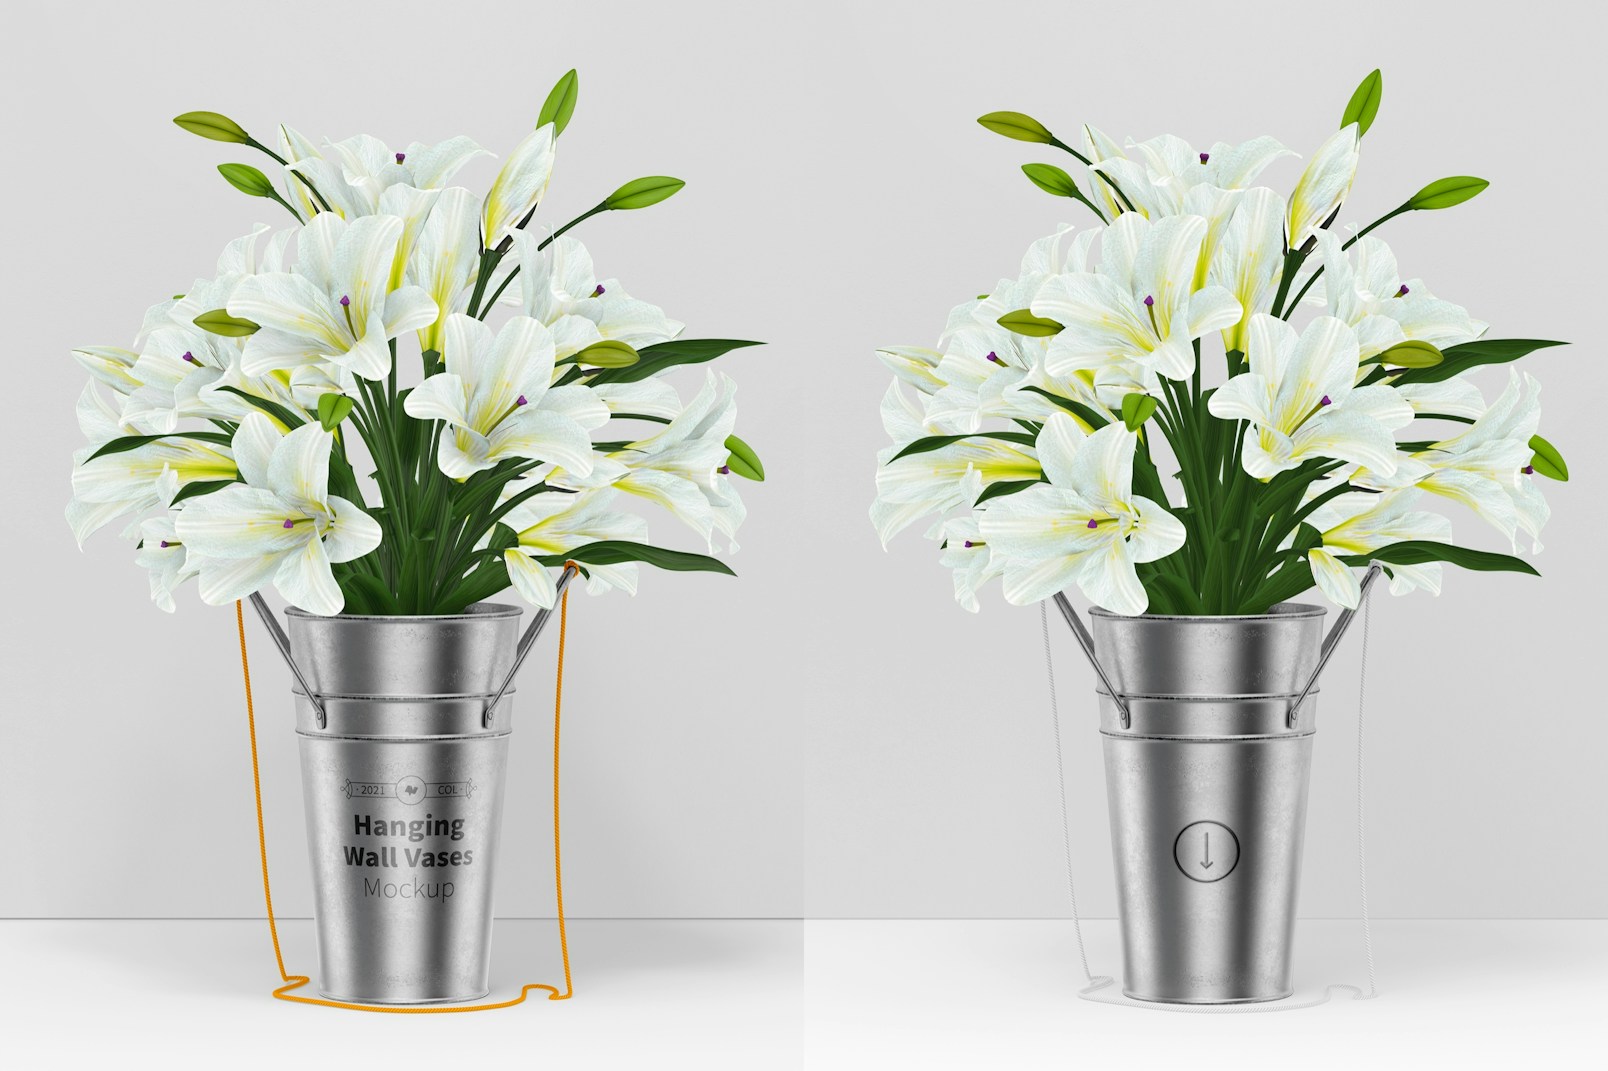 Hanging Wall Vase with Flowers Mockup